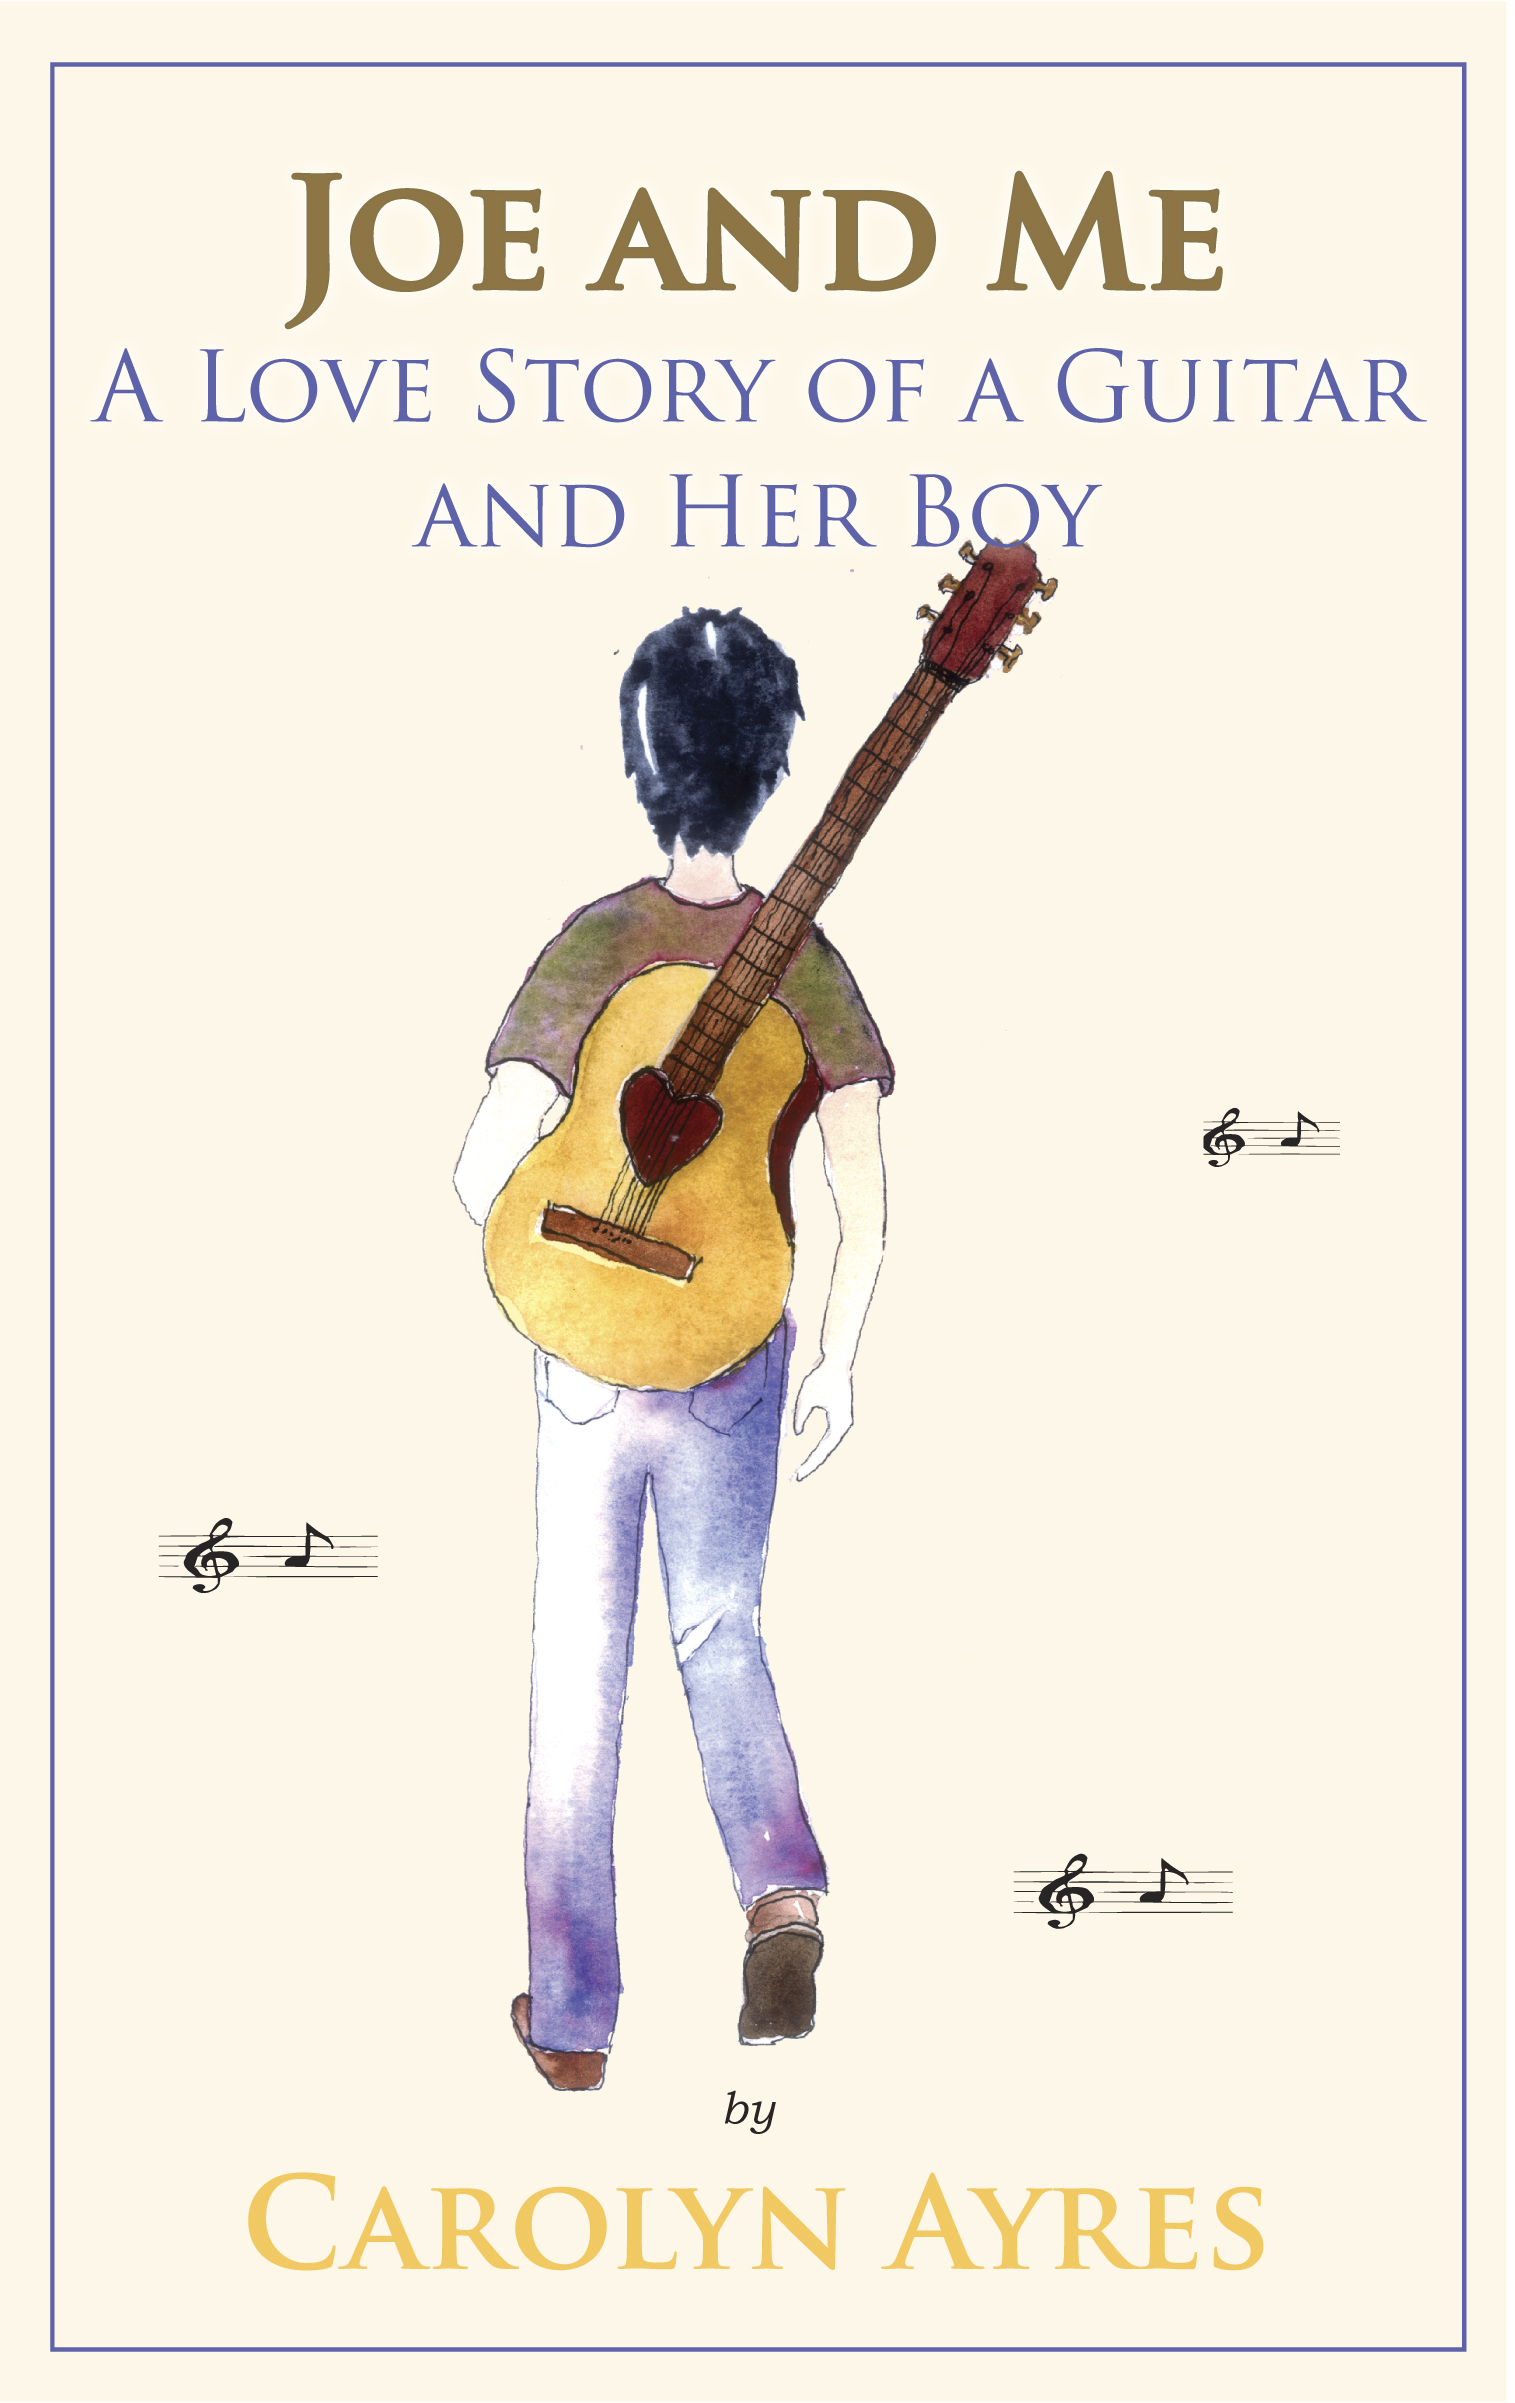 Joe and Me: A Love Story of a Guitar and Her Boy